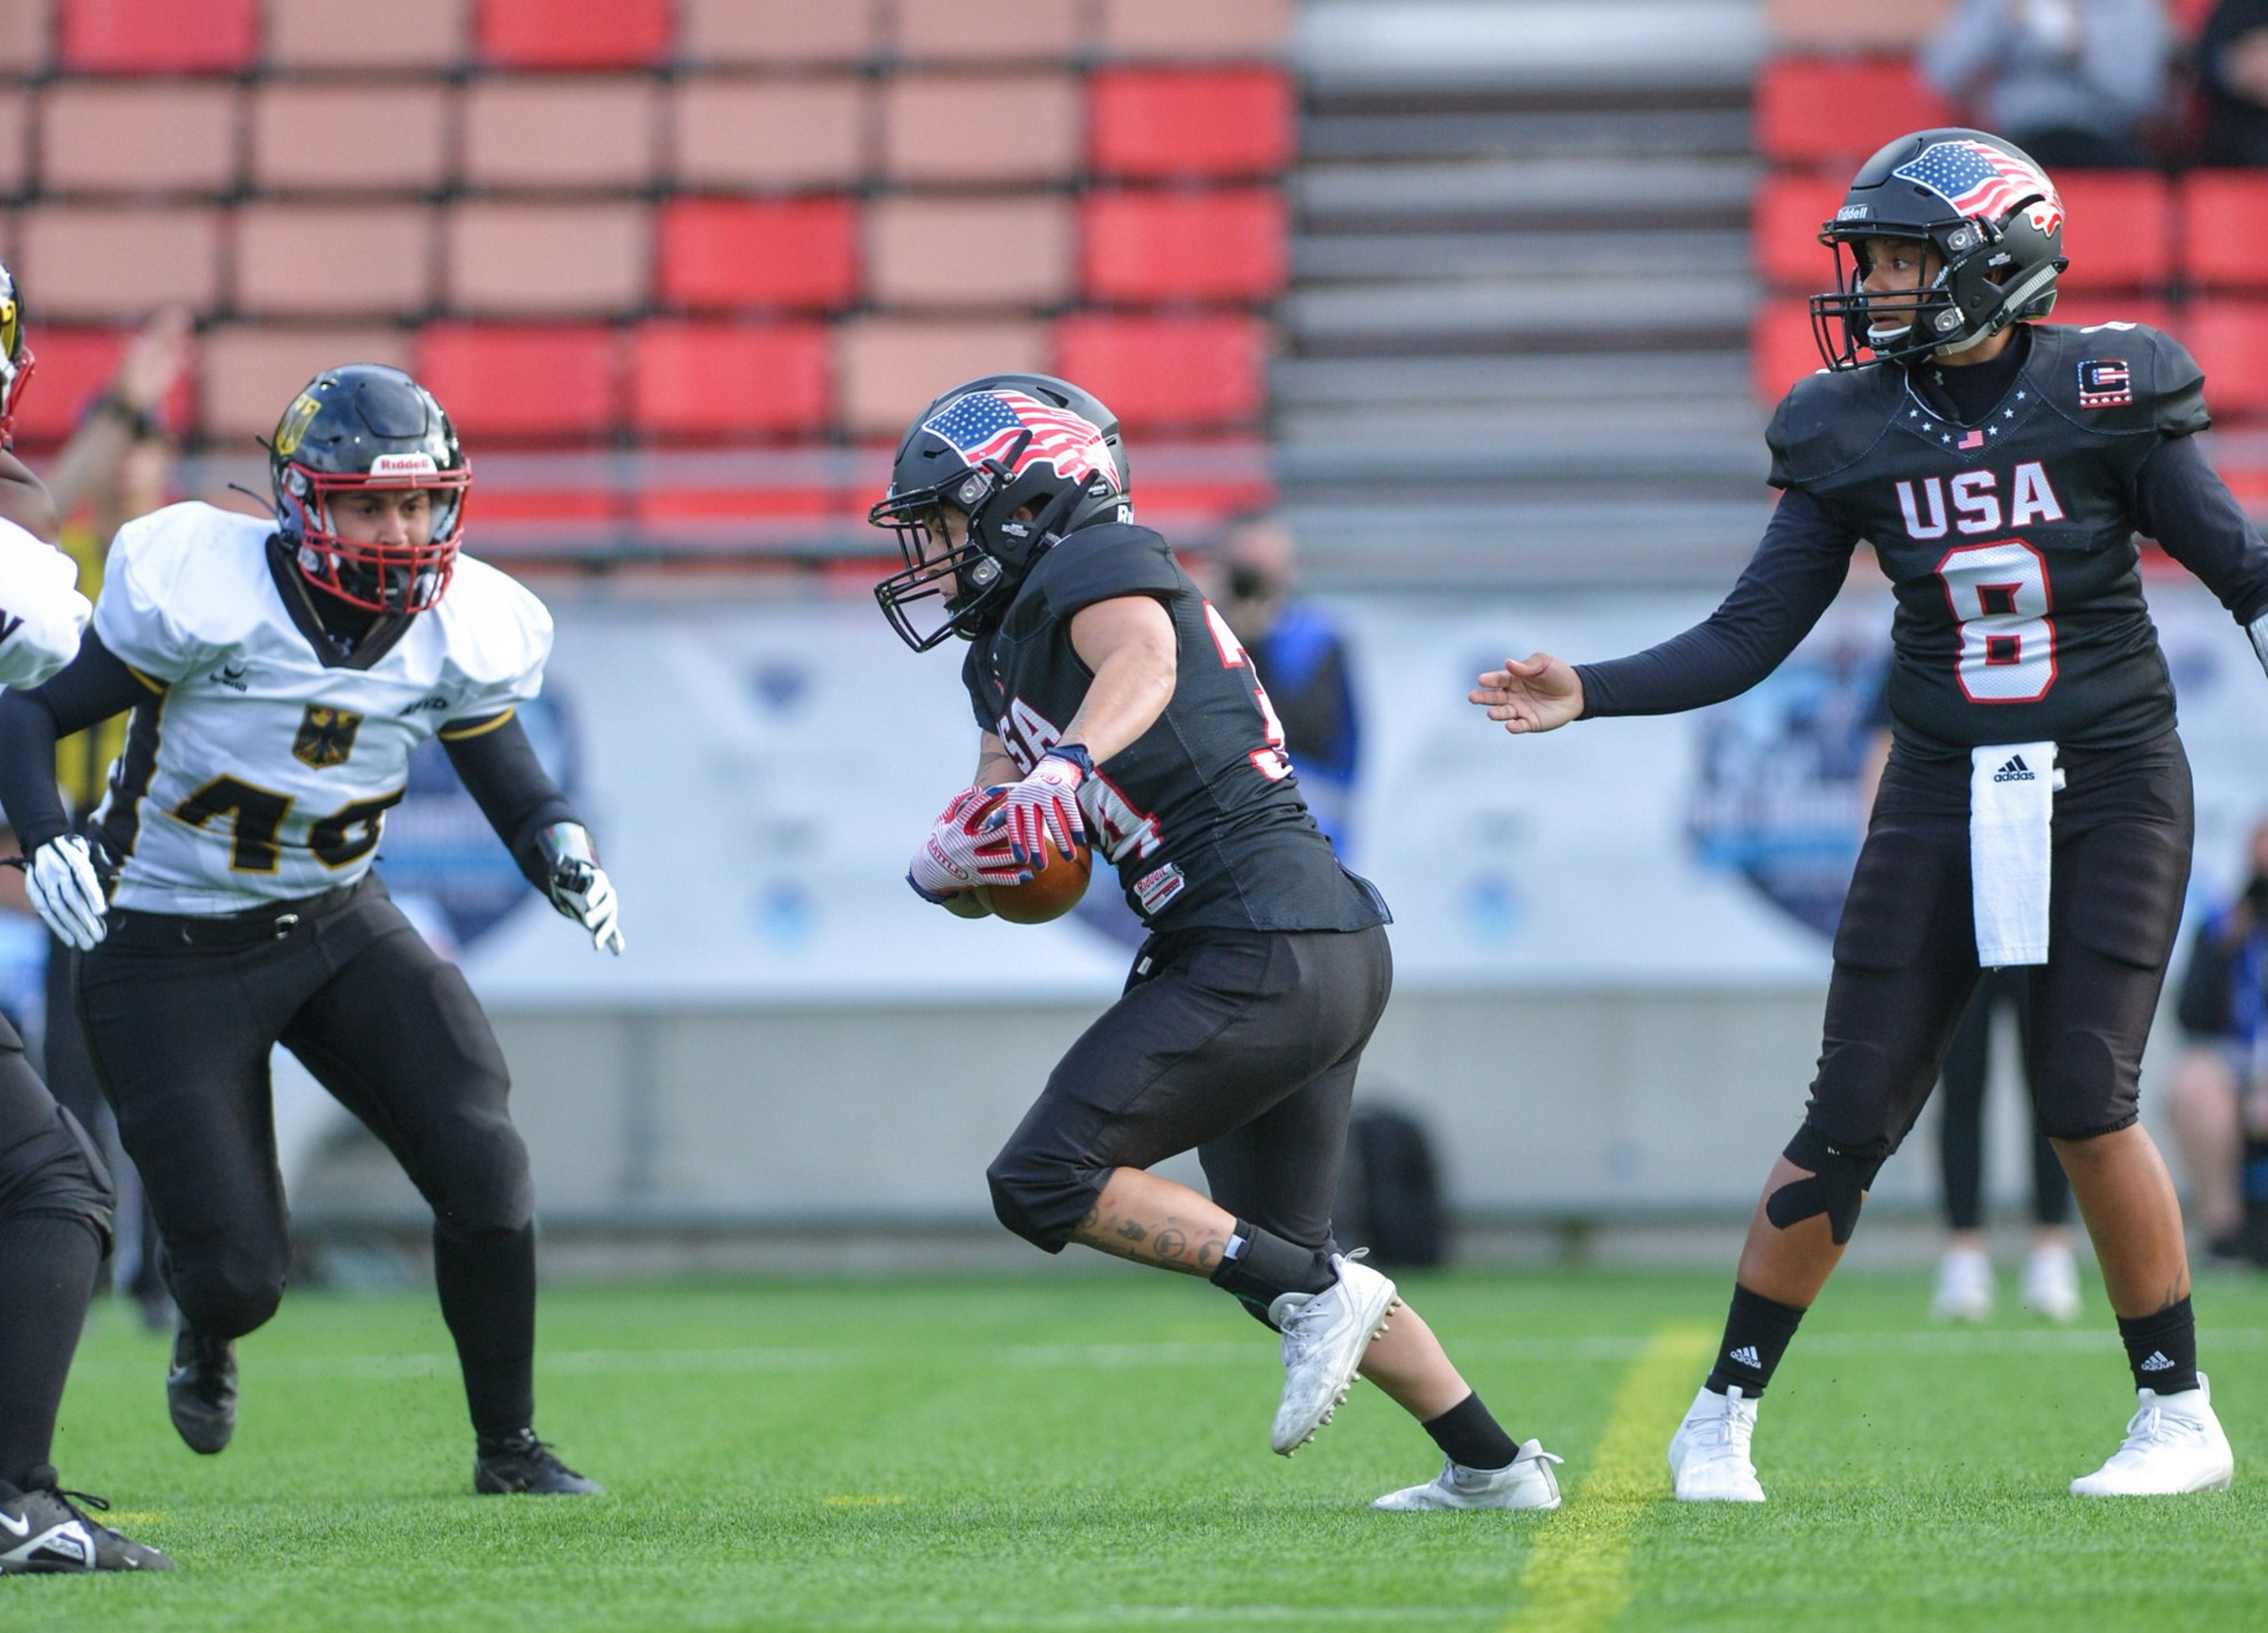 Team USA crushed Germany on first day of the IFAF Women’s World